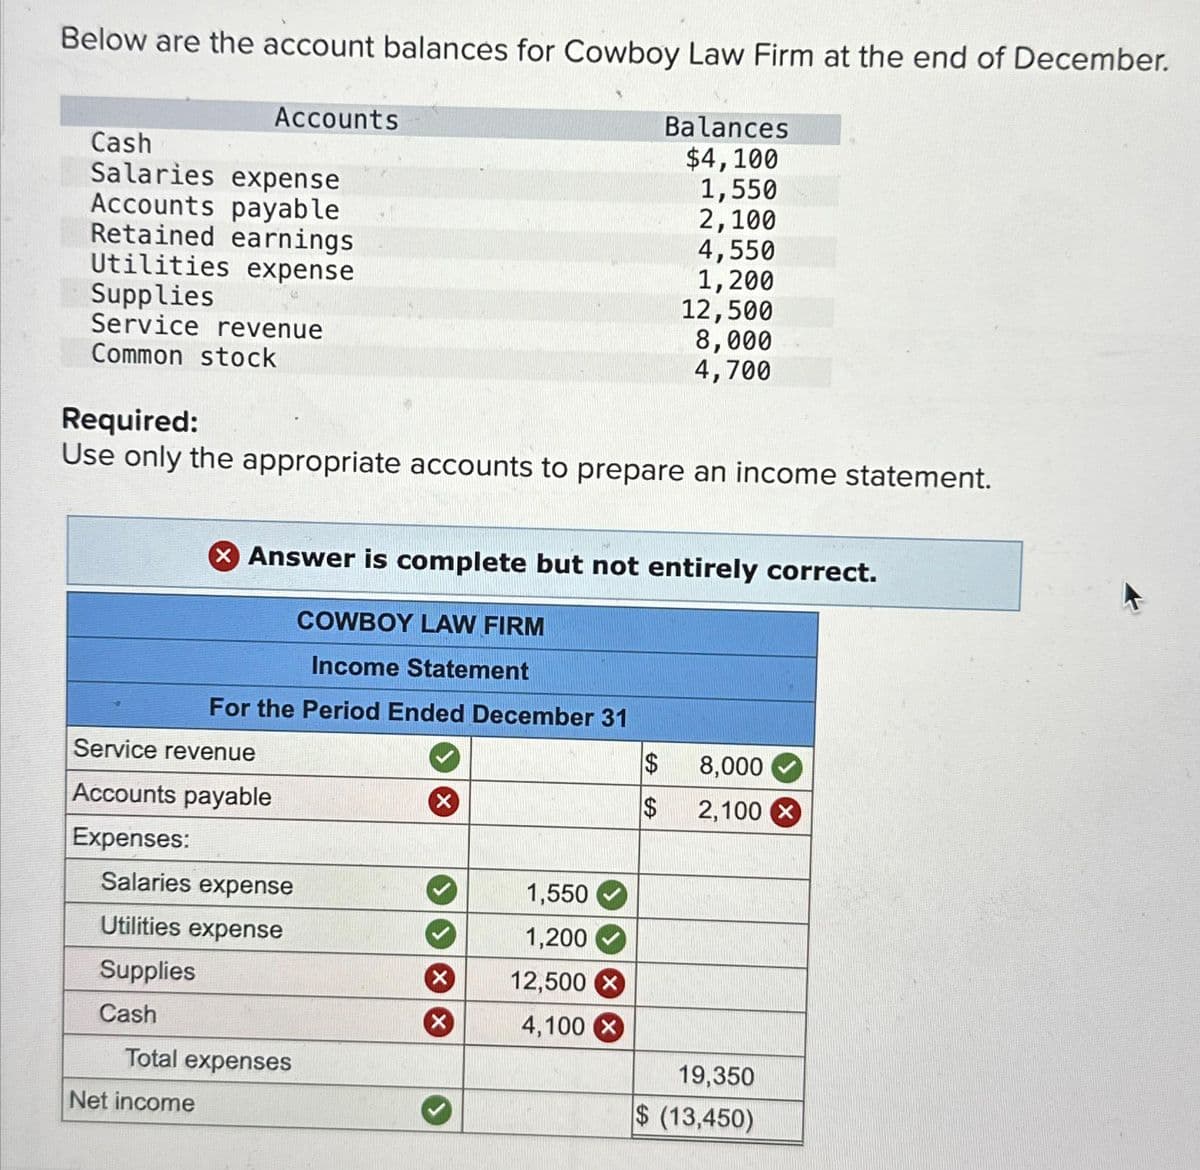 Below are the account balances for Cowboy Law Firm at the end of December.
Cash
Salaries expense
Accounts payable
Retained earnings
Accounts
Utilities expense
Supplies
Service revenue
Common stock
Required:
Use only the appropriate accounts to prepare an income statement.
Service revenue
Accounts payable
Expenses:
COWBOY LAW FIRM
Income Statement
For the Period Ended December 31
Net income
X Answer is complete but not entirely correct.
Salaries expense
Utilities expense
Supplies
Cash
Total expenses
X
X
X
Balances
$4,100
1,550
2,100
1,550
1,200
12,500 X
4,100 X
4,550
1,200
12,500
8,000
4,700
$
$
8,000
2,100 x
19,350
$ (13,450)